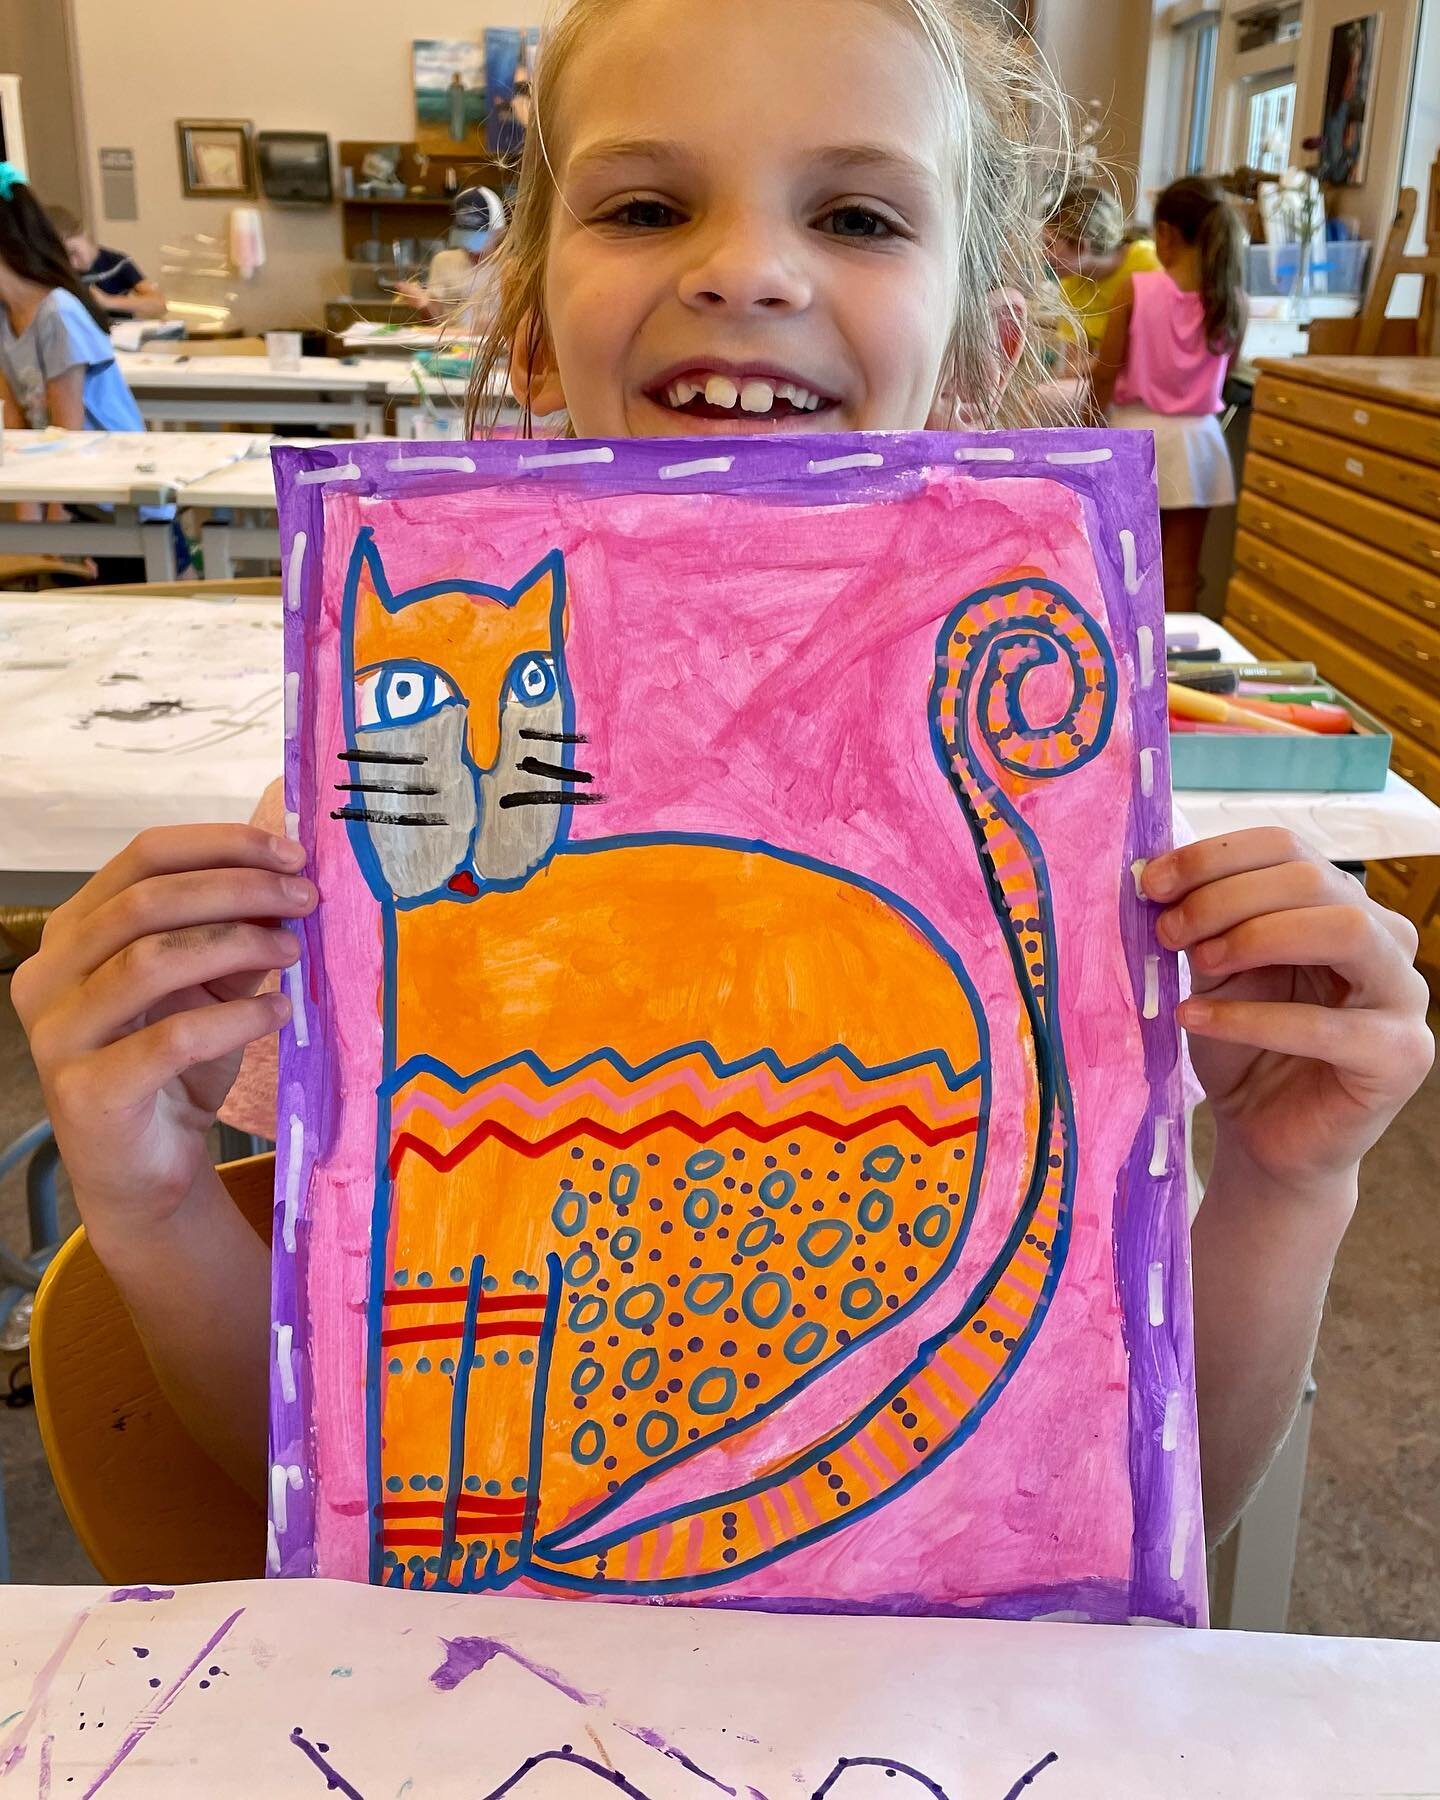 Fantastic Felines inspired by the one and only @laurelburchstudios 🐱
.
.
.
.
#colorwheelsnashville #summerartcamp